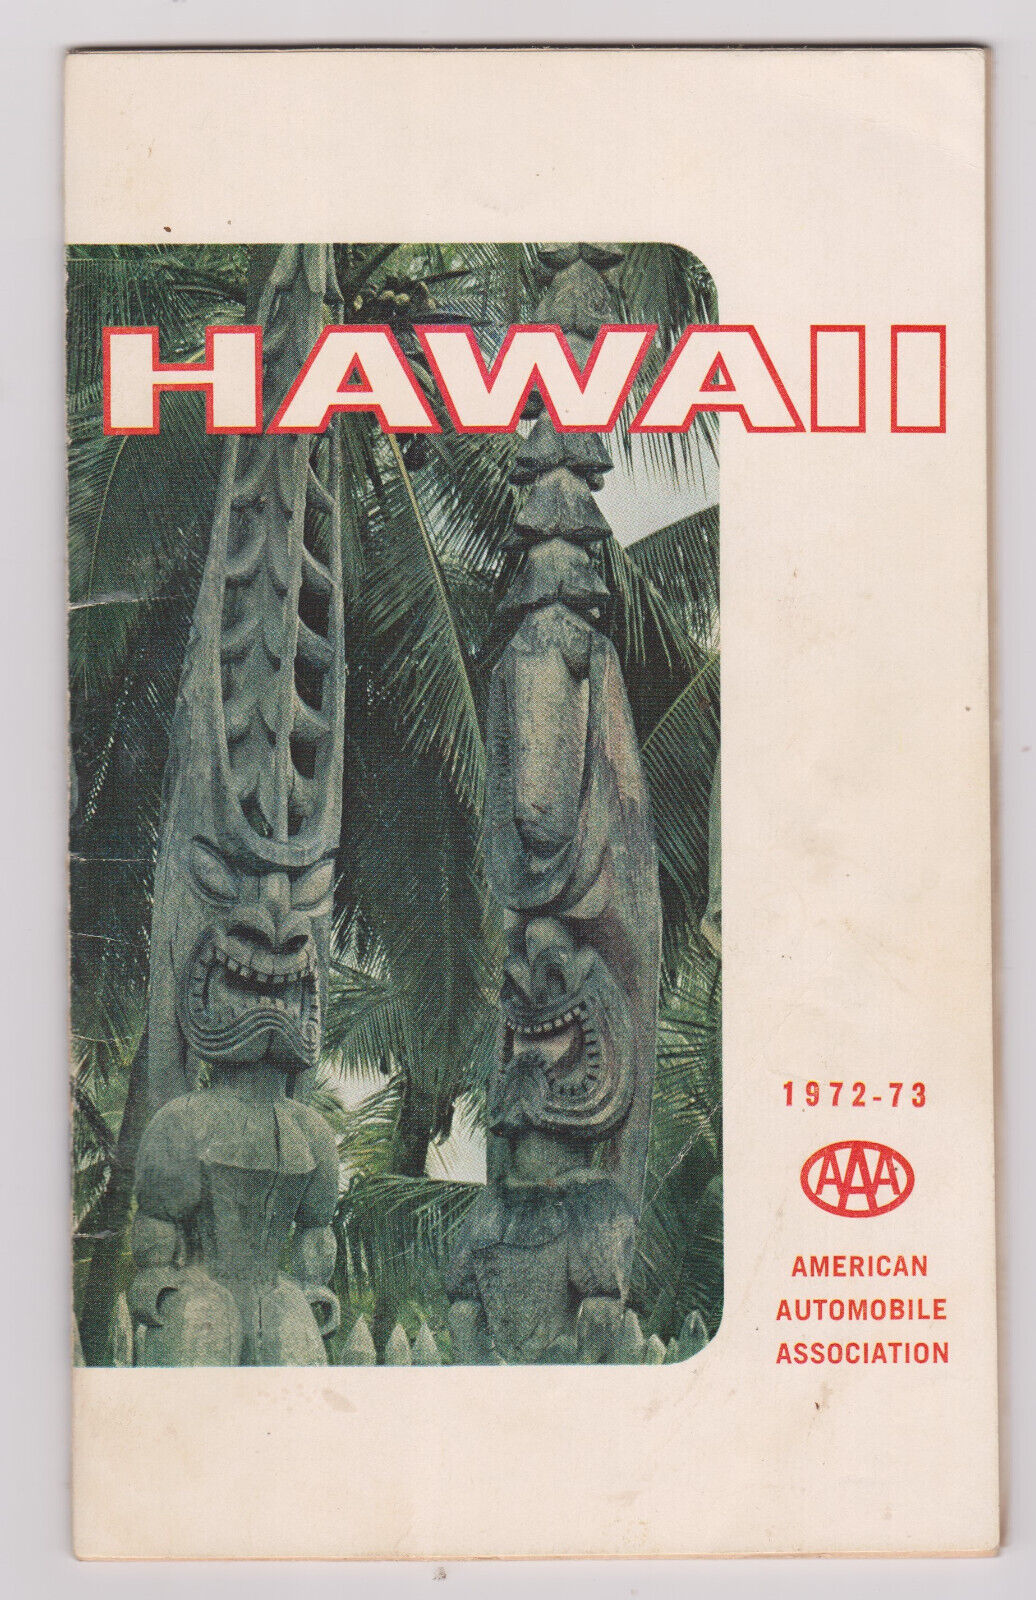 1972-73 AAA Tour Guide of Hawaii  - maps, prices, descriptions of establishments